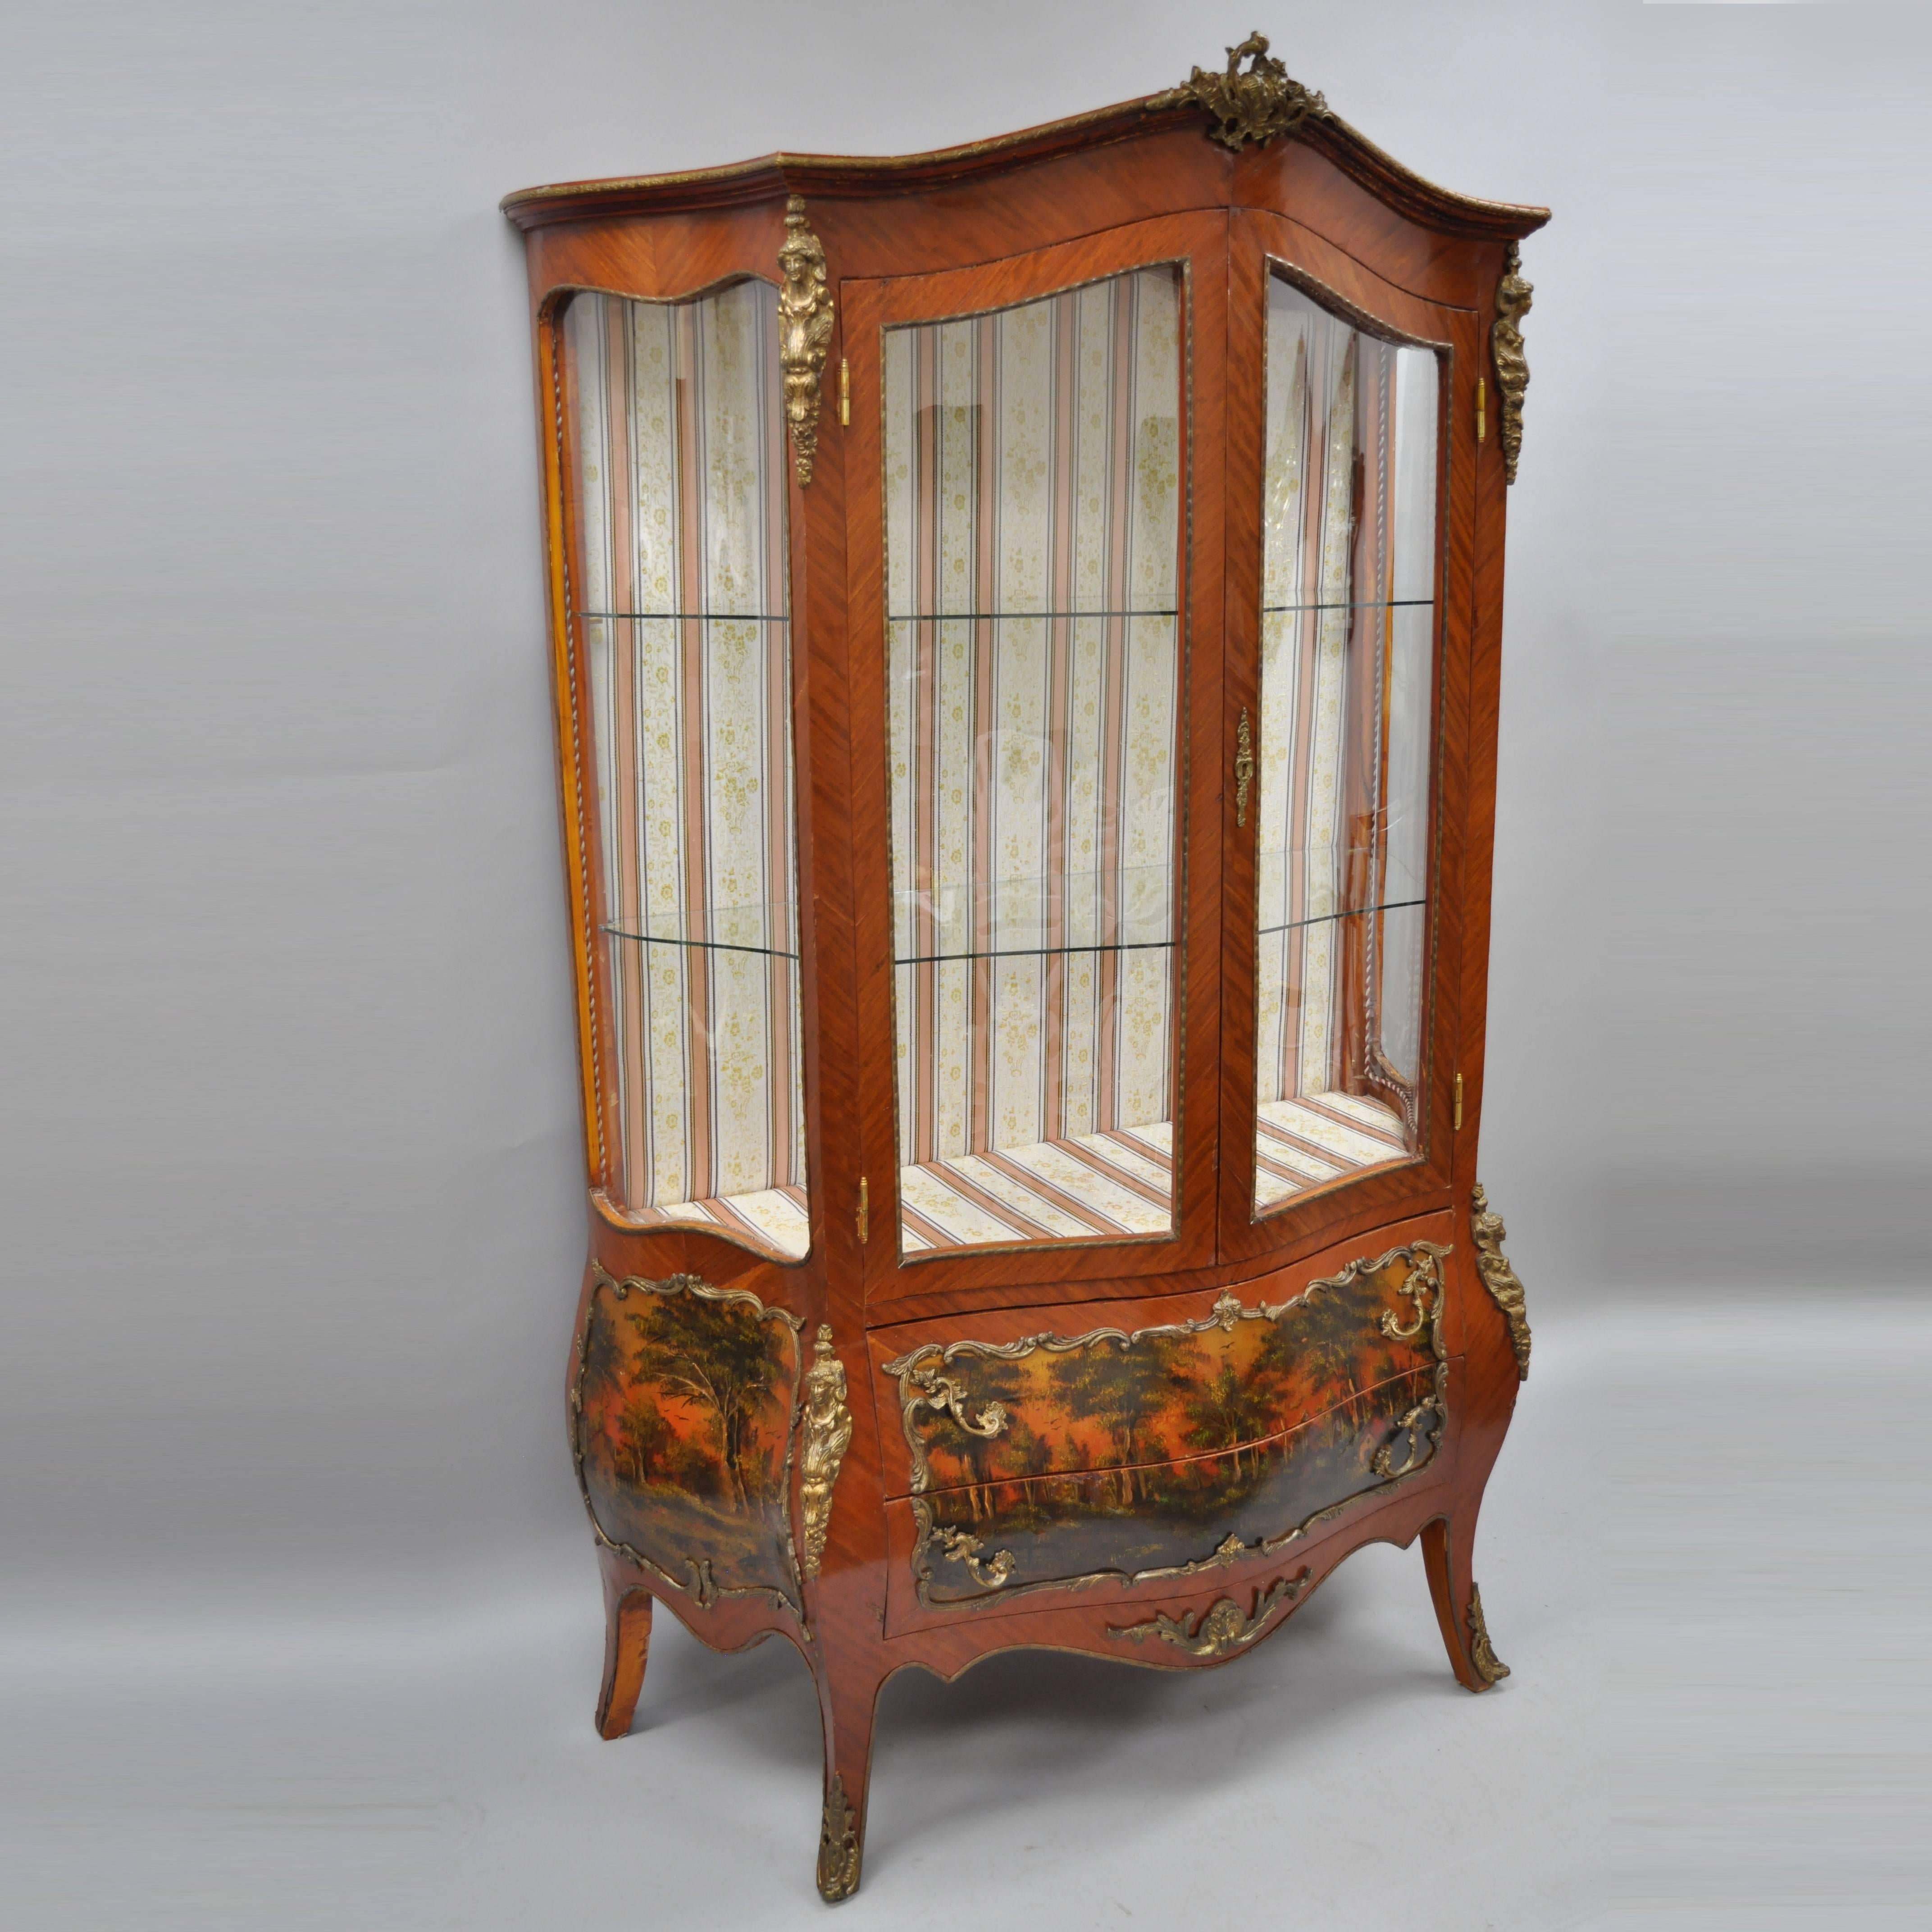 Details about   Antique French Louis XIV  Carved Gilt Wood wooden Vitrine/curio/china cabinet 